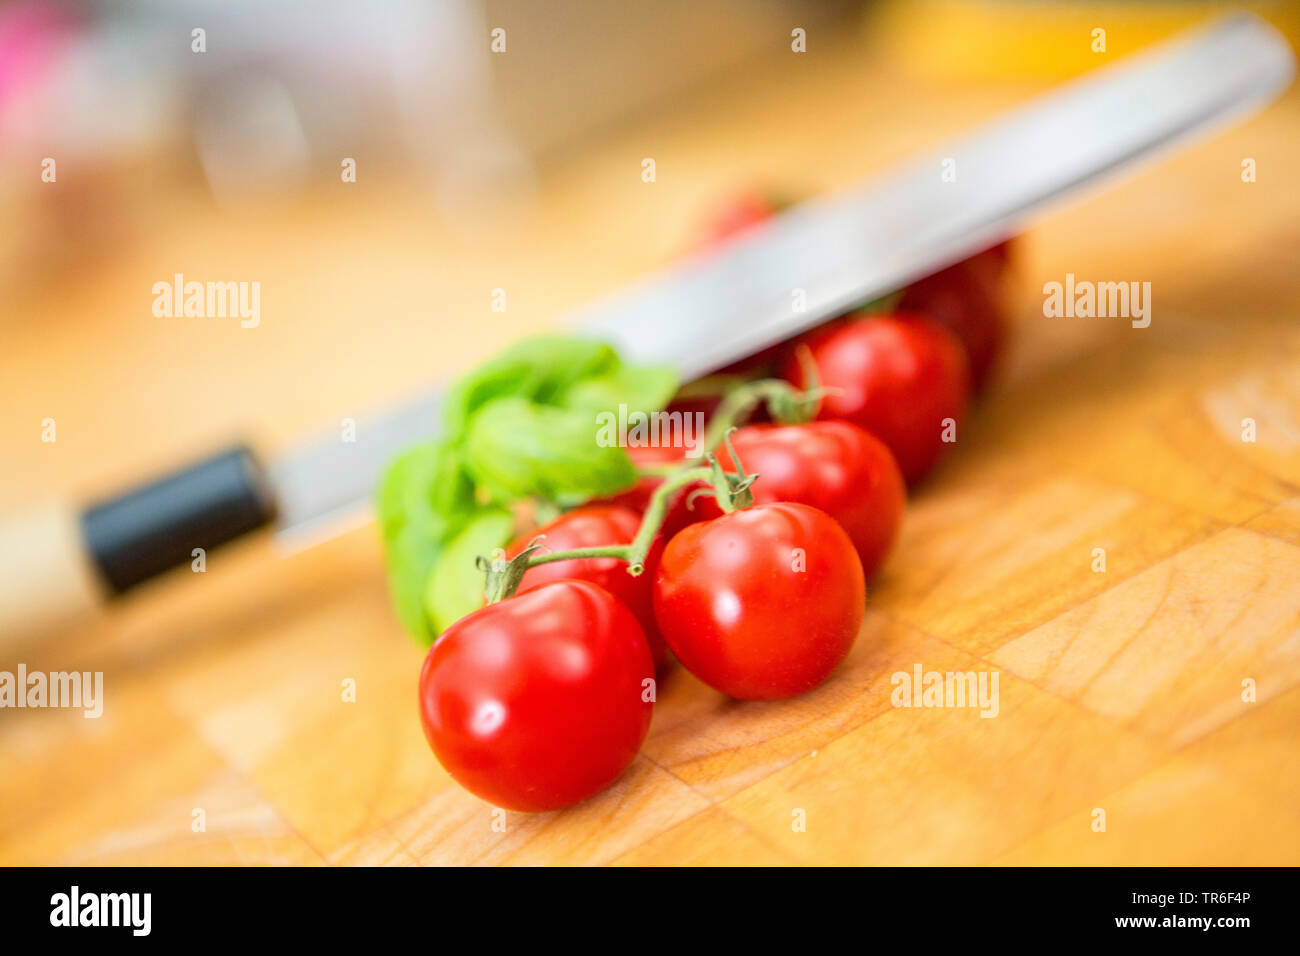 garden tomato (Solanum lycopersicum, Lycopersicon esculentum), cocktail tomatoes with tulsi and kitchen knife on a wooden board, Germany Stock Photo